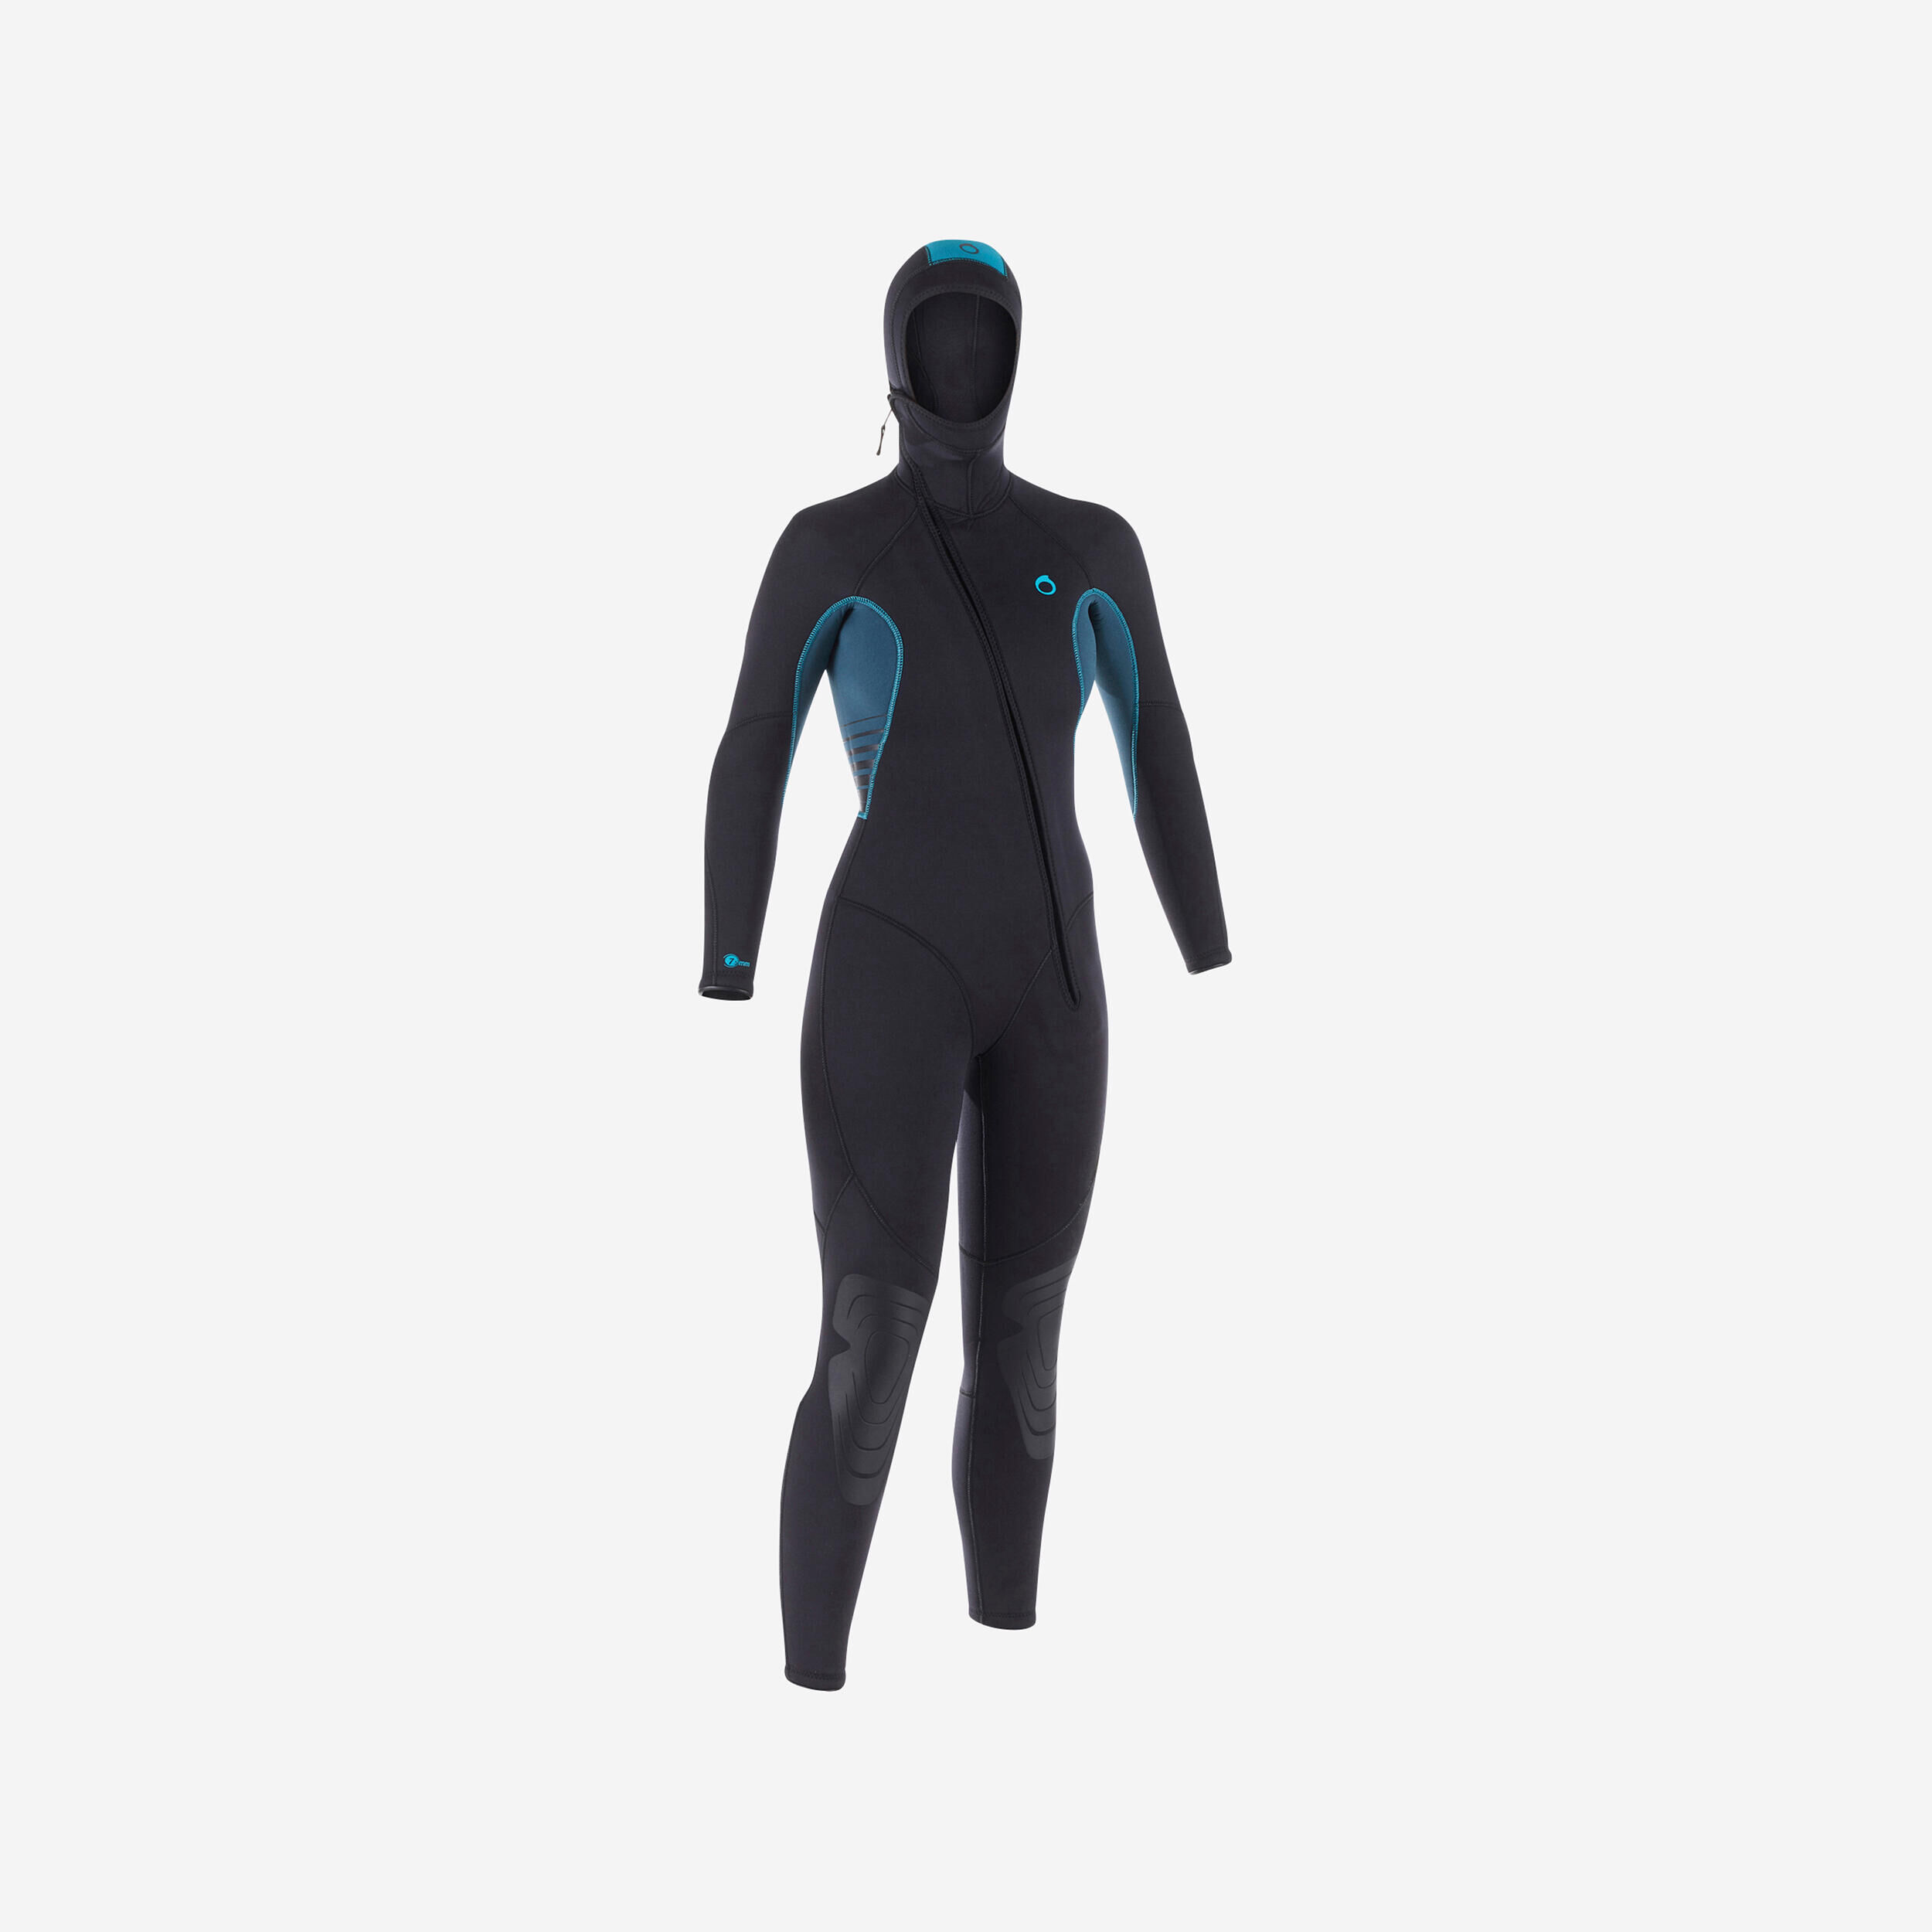 SUBEA Women's diving wetsuit with hood 7.5 mm neoprene - SCD 500 black and blue